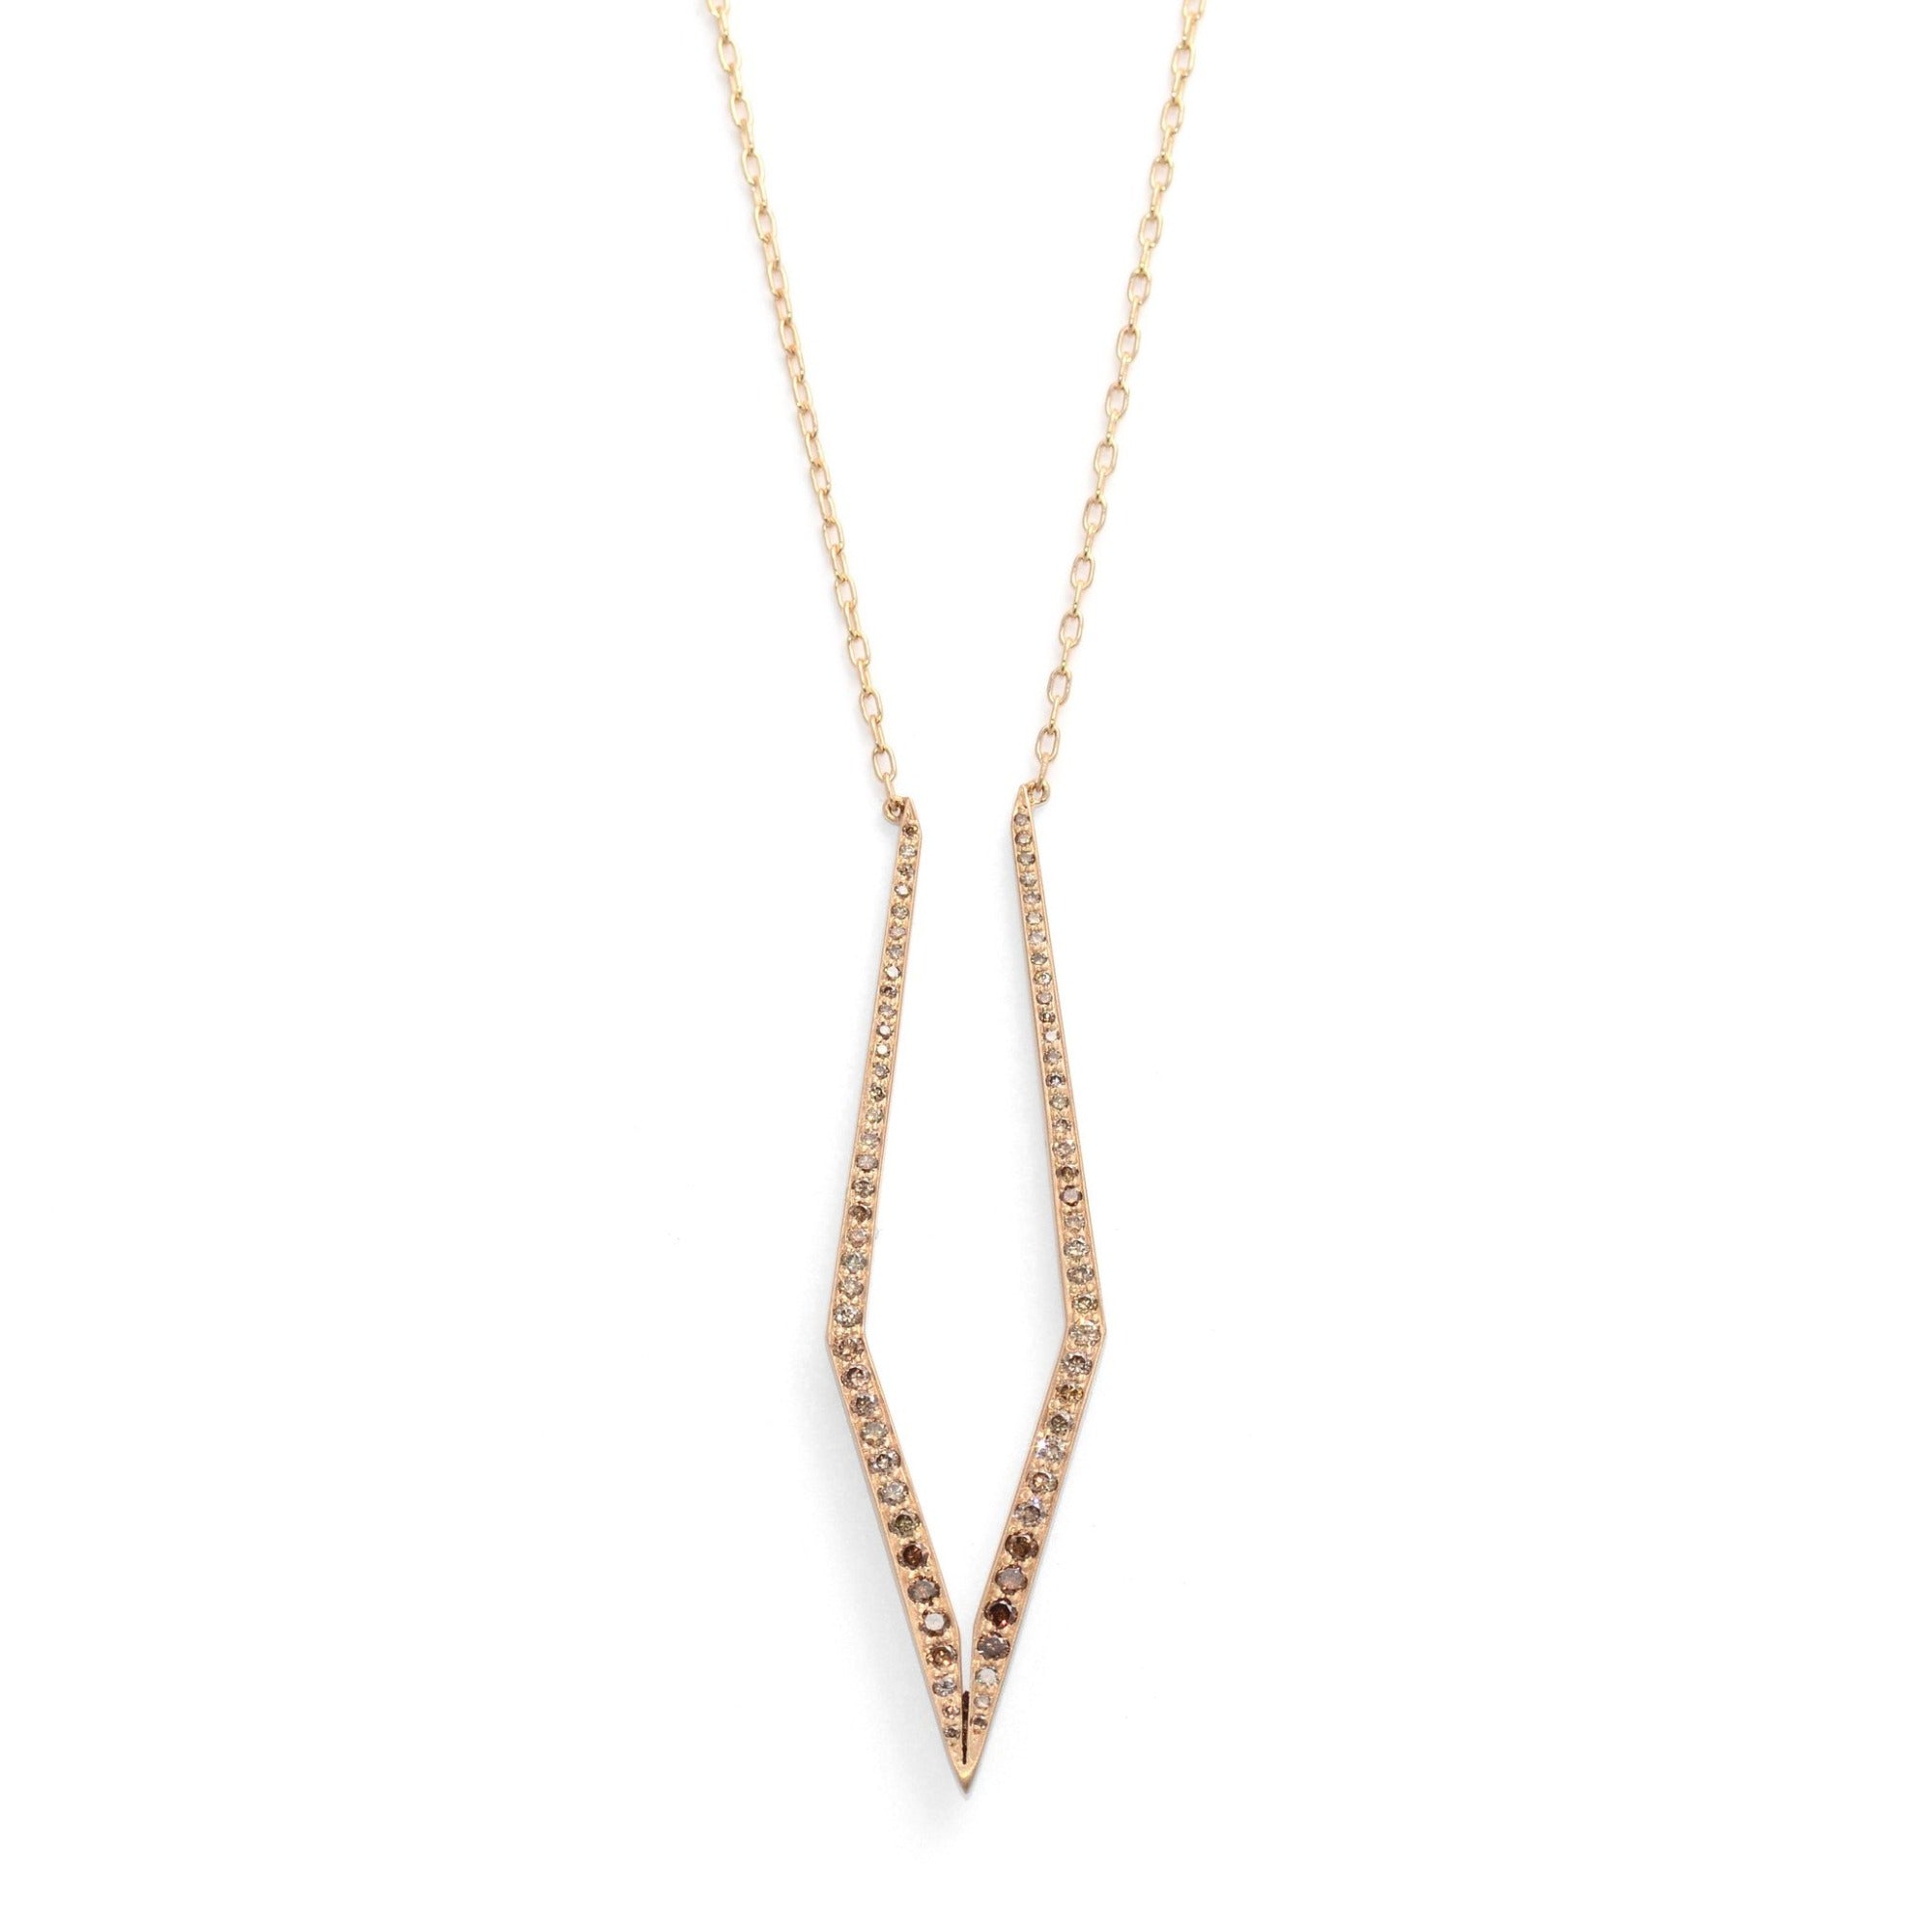 14k yellow gold/brown ombre pave diamonds diamond mirror trace necklace